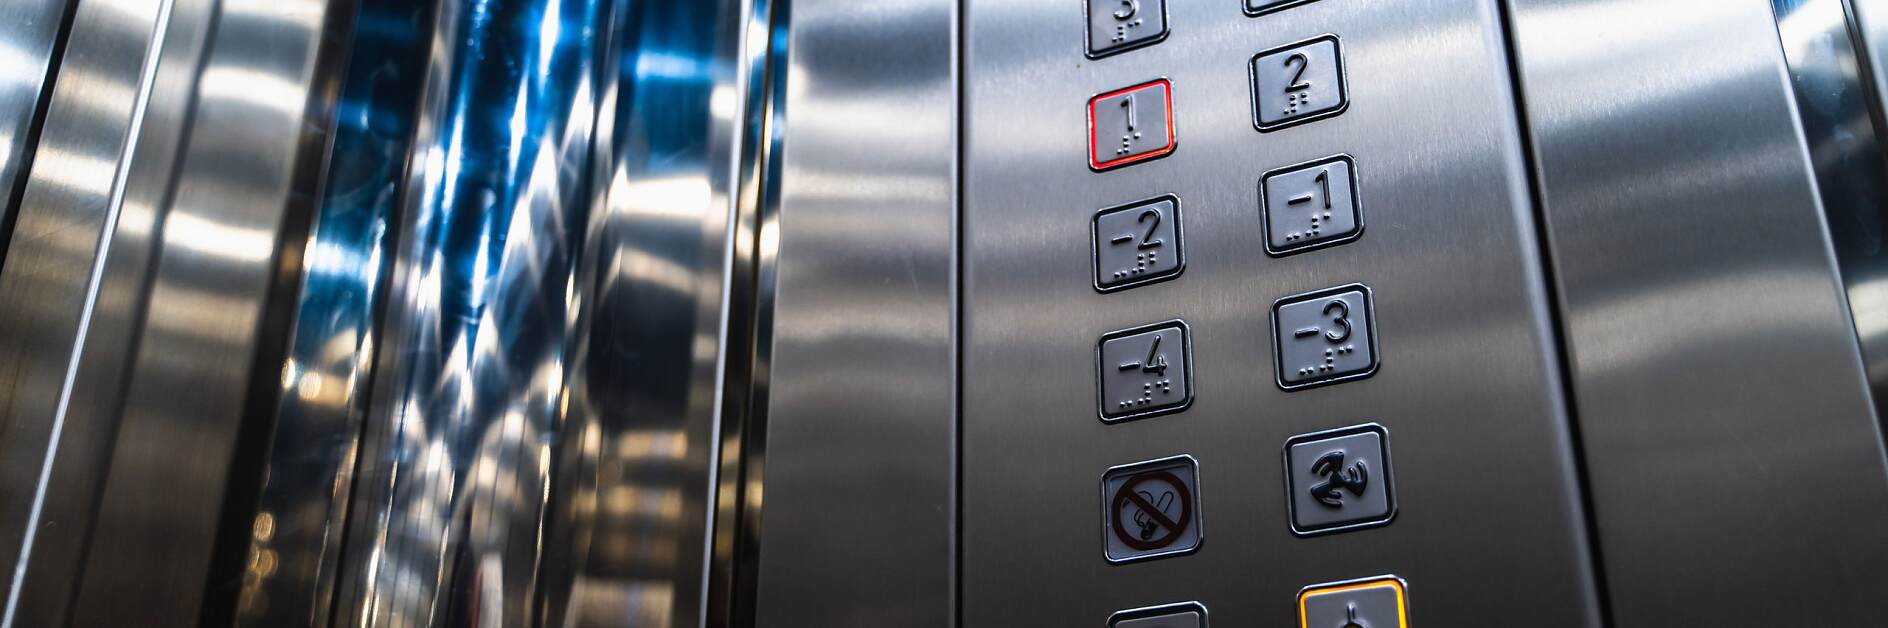 Elevator Buttons for Disabled Blind People with Braille Language Signs on Panel